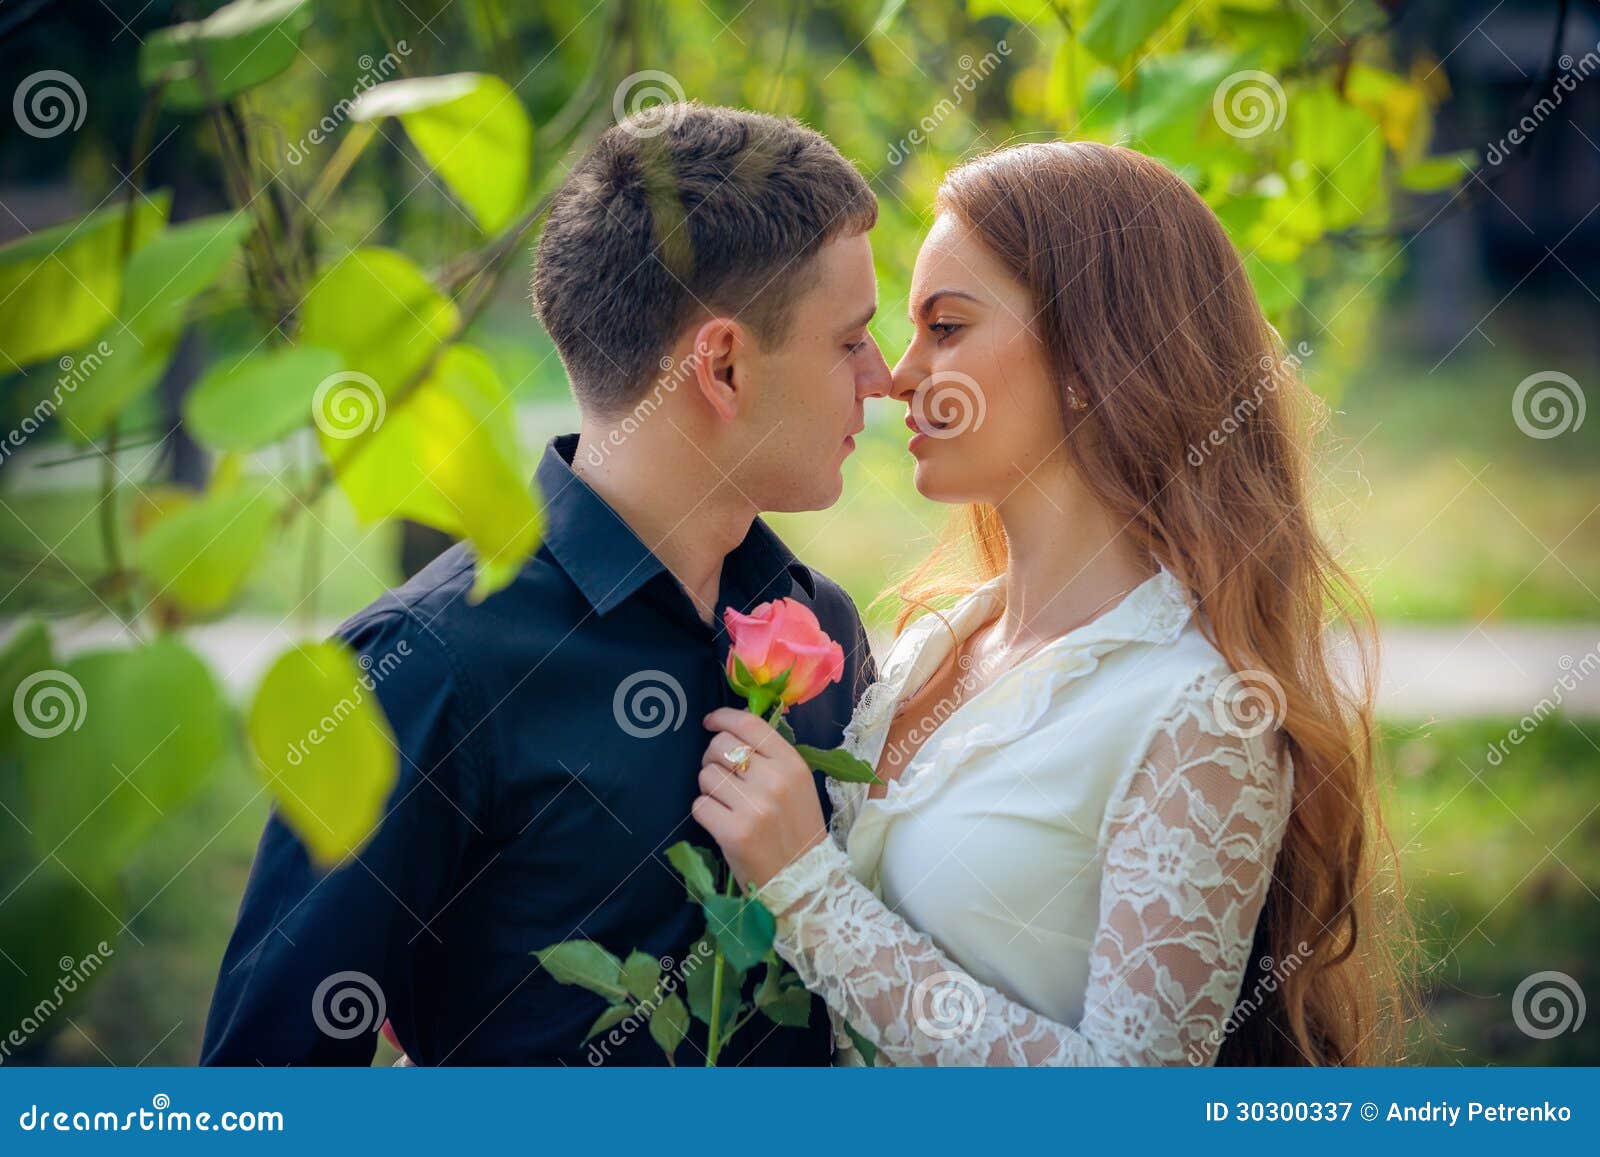 love and affection between a young couple